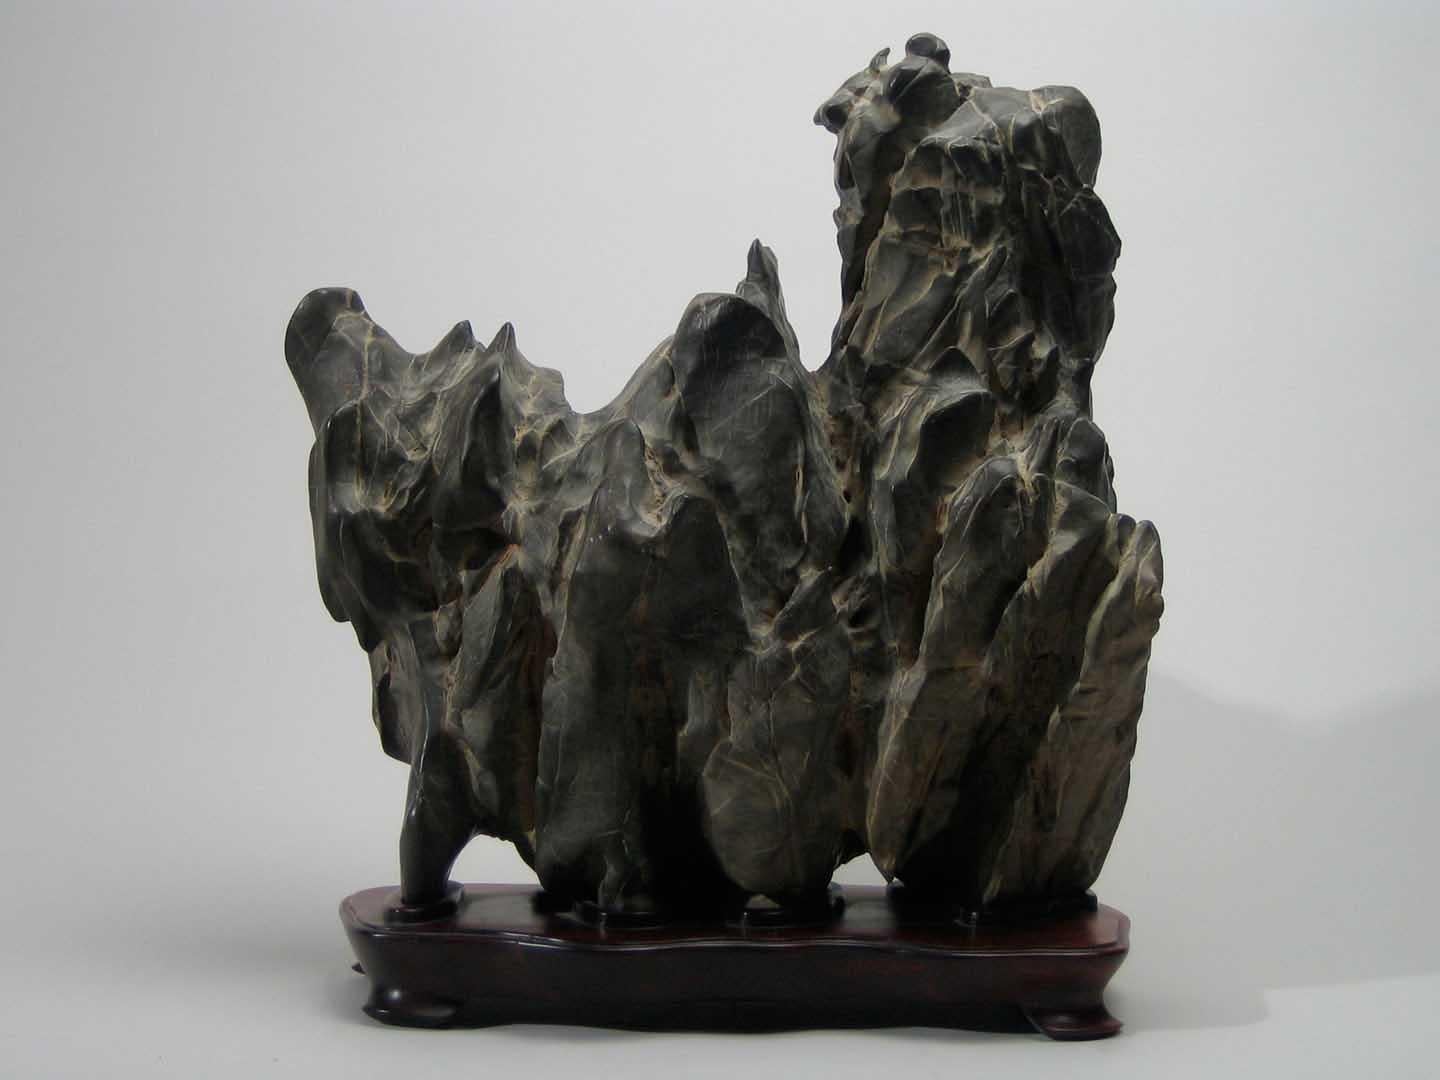 Hand-Carved Antique Chinese Gongshi (Scholar’s Rock) For Sale